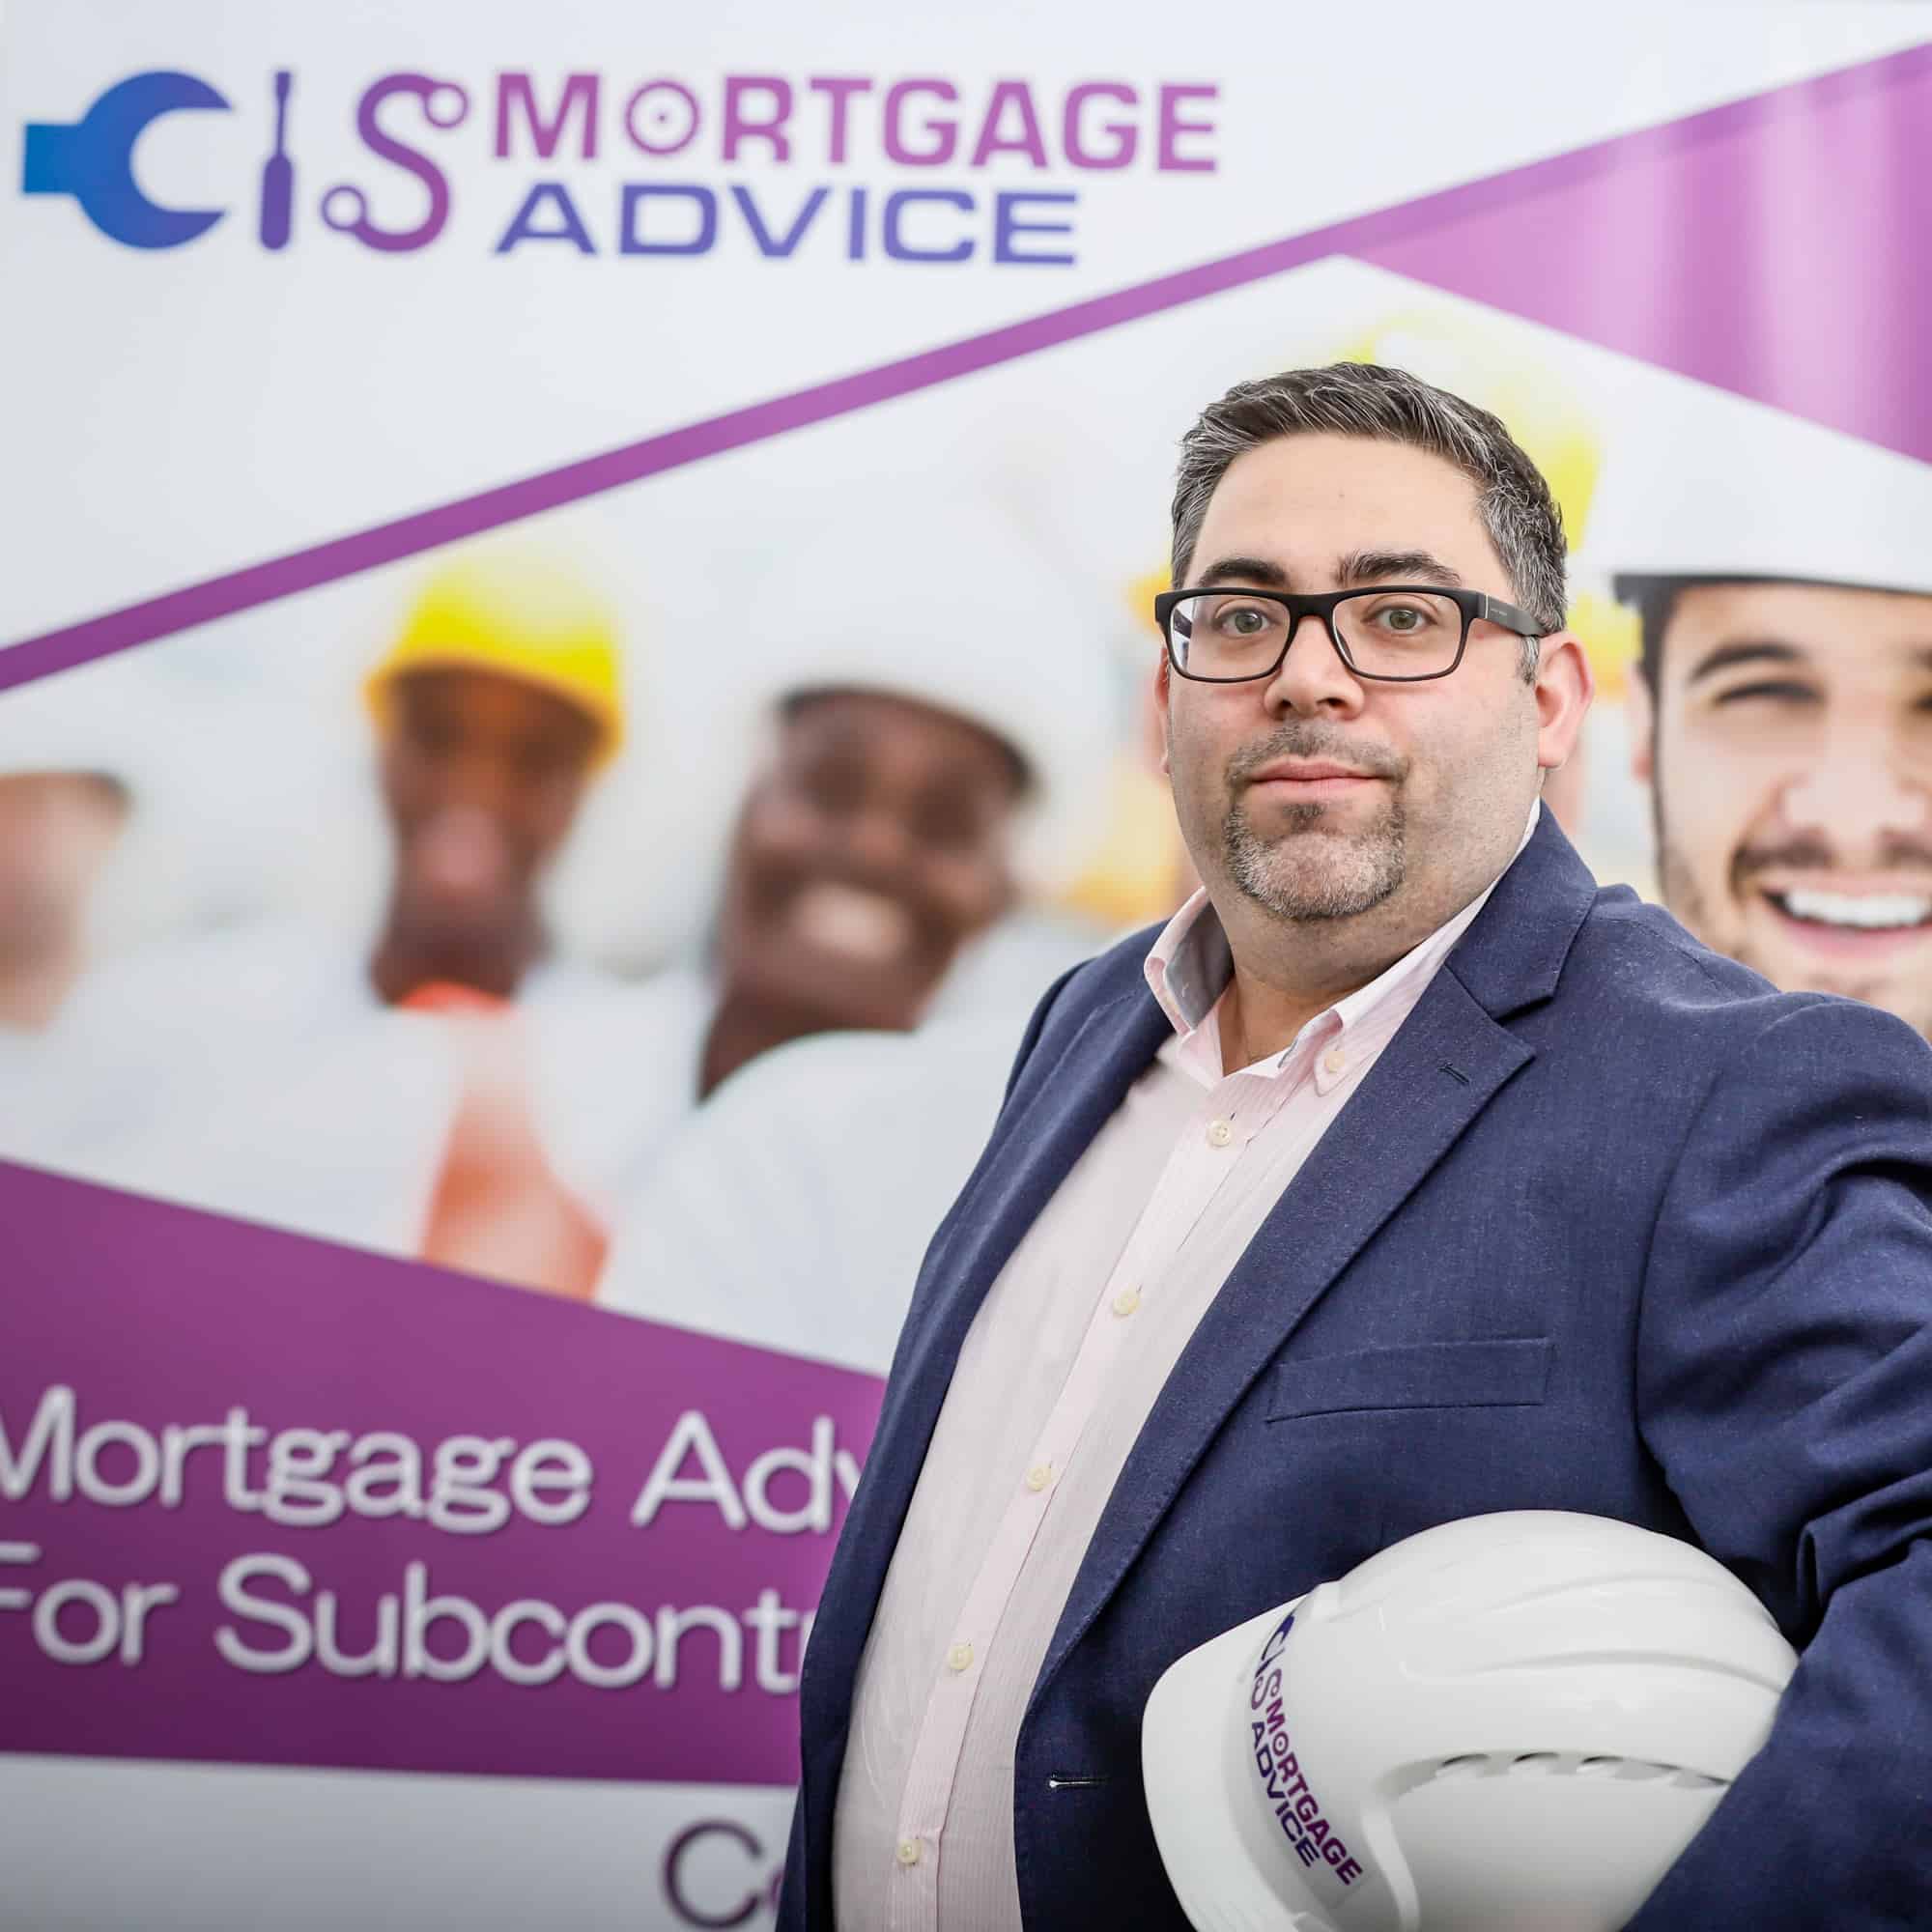 Get Mortgage Advice, Expert Mortgage Advice for CIS Subcontractors